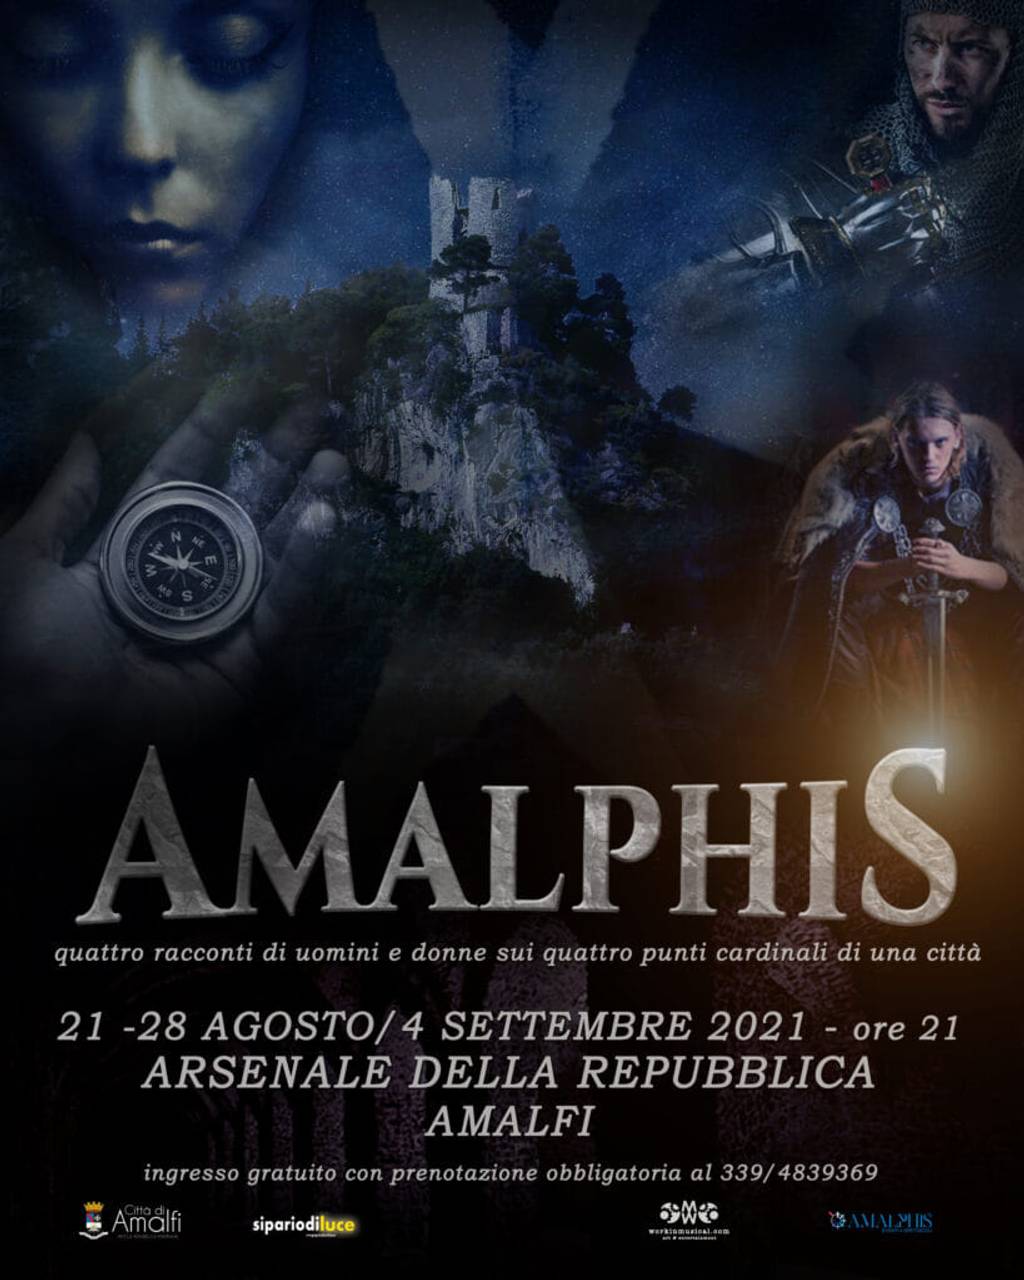 AMALPHIS, an immersive journey through the history of the City